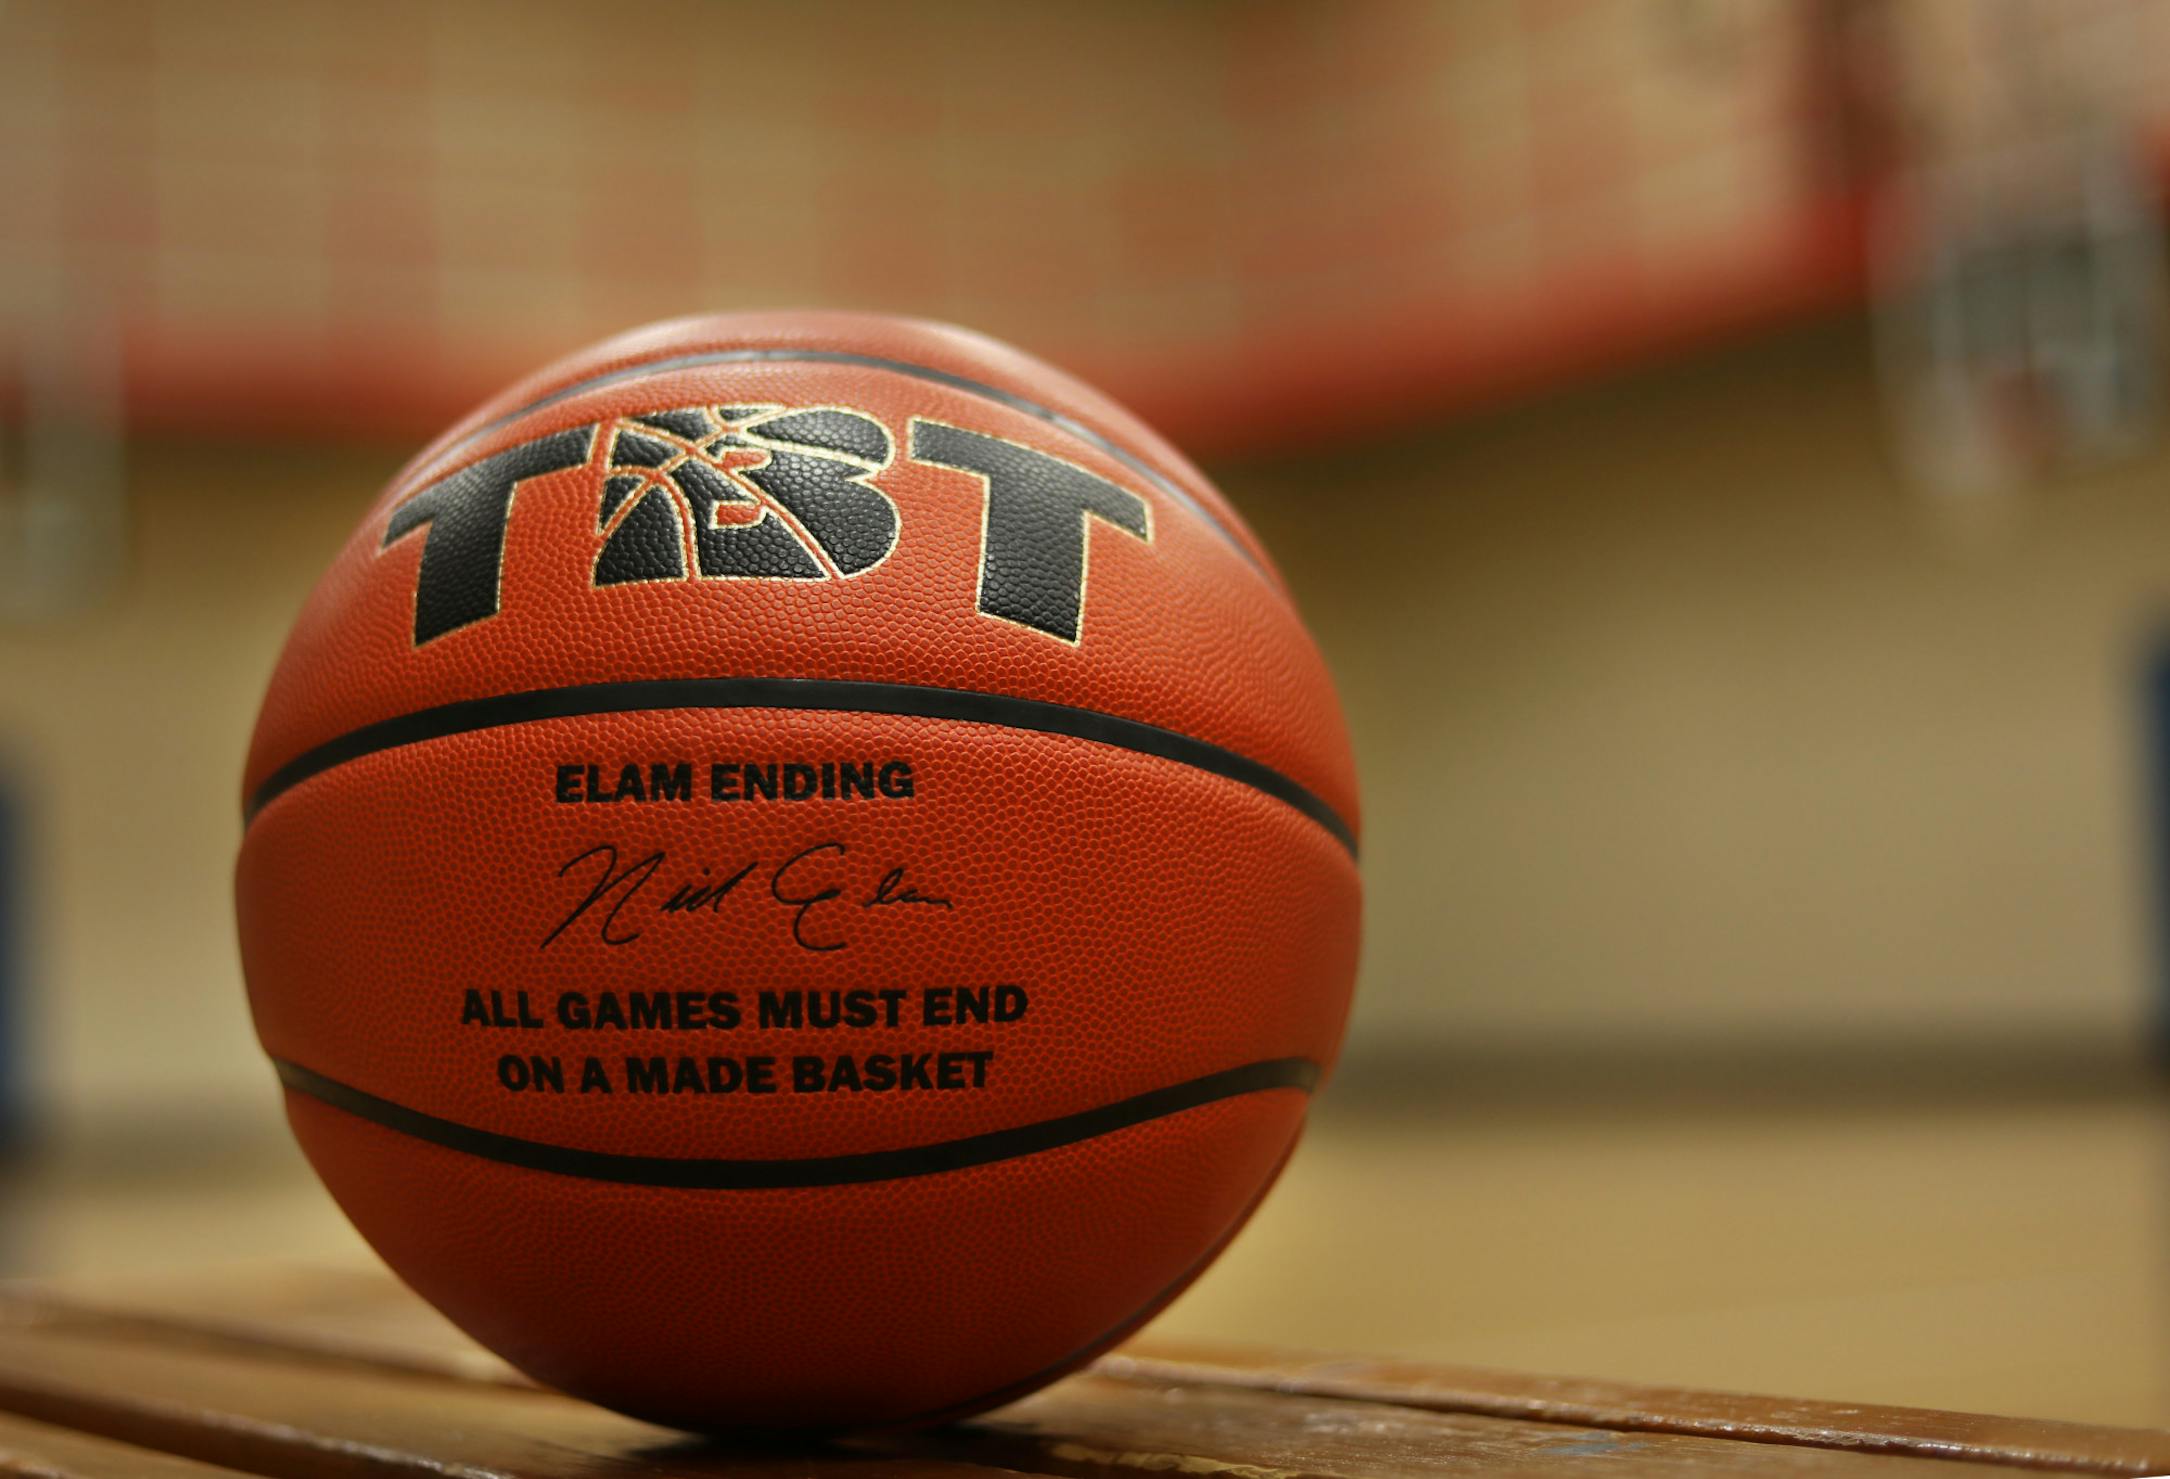 Elam Ending scoring system used to end NBA All-Star Game: How it works